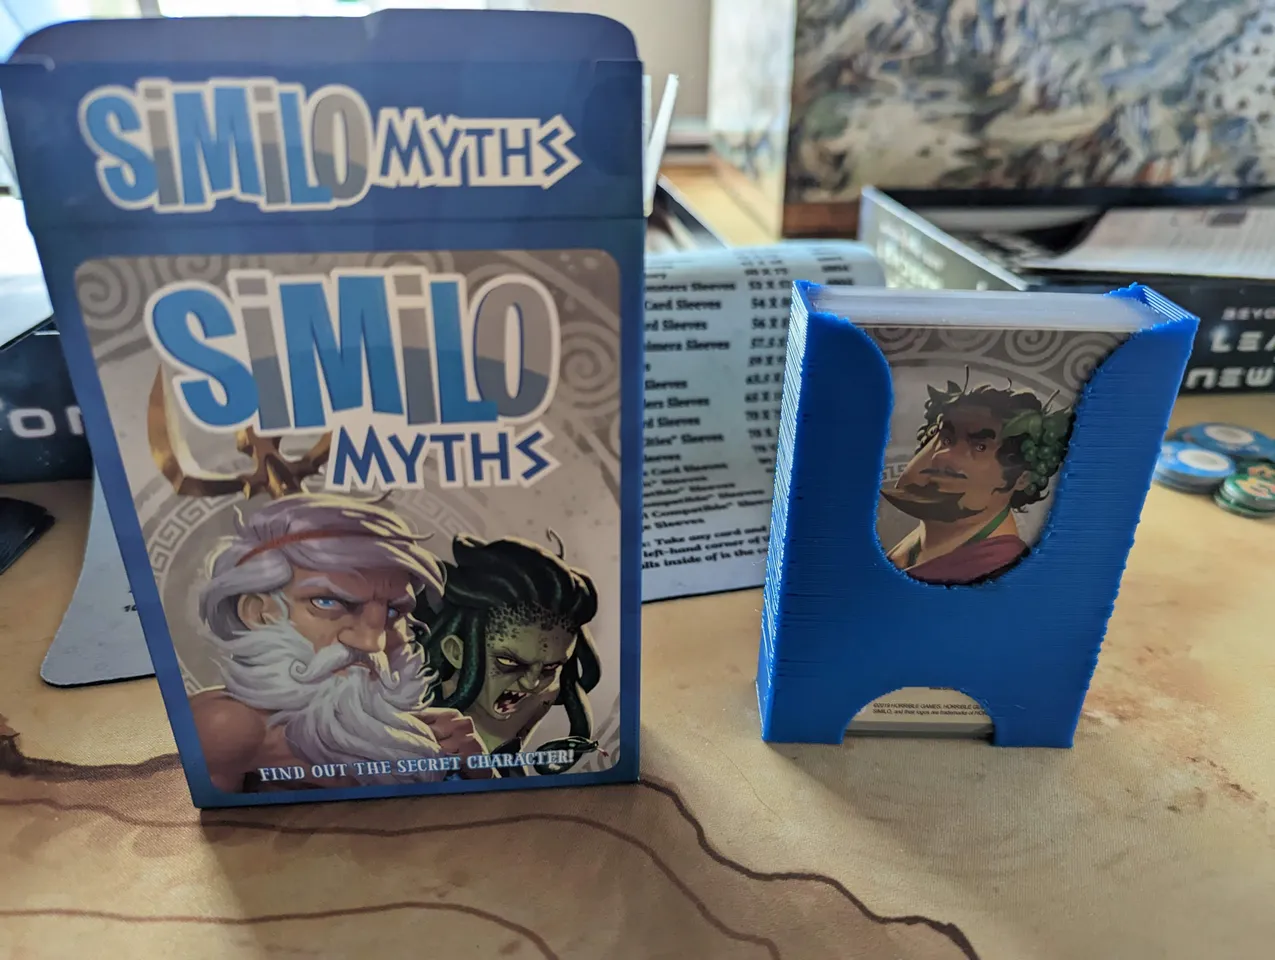 REMIX Cthulhu Death May Die - Retail Boxes Inserts SLEEVED CARDS